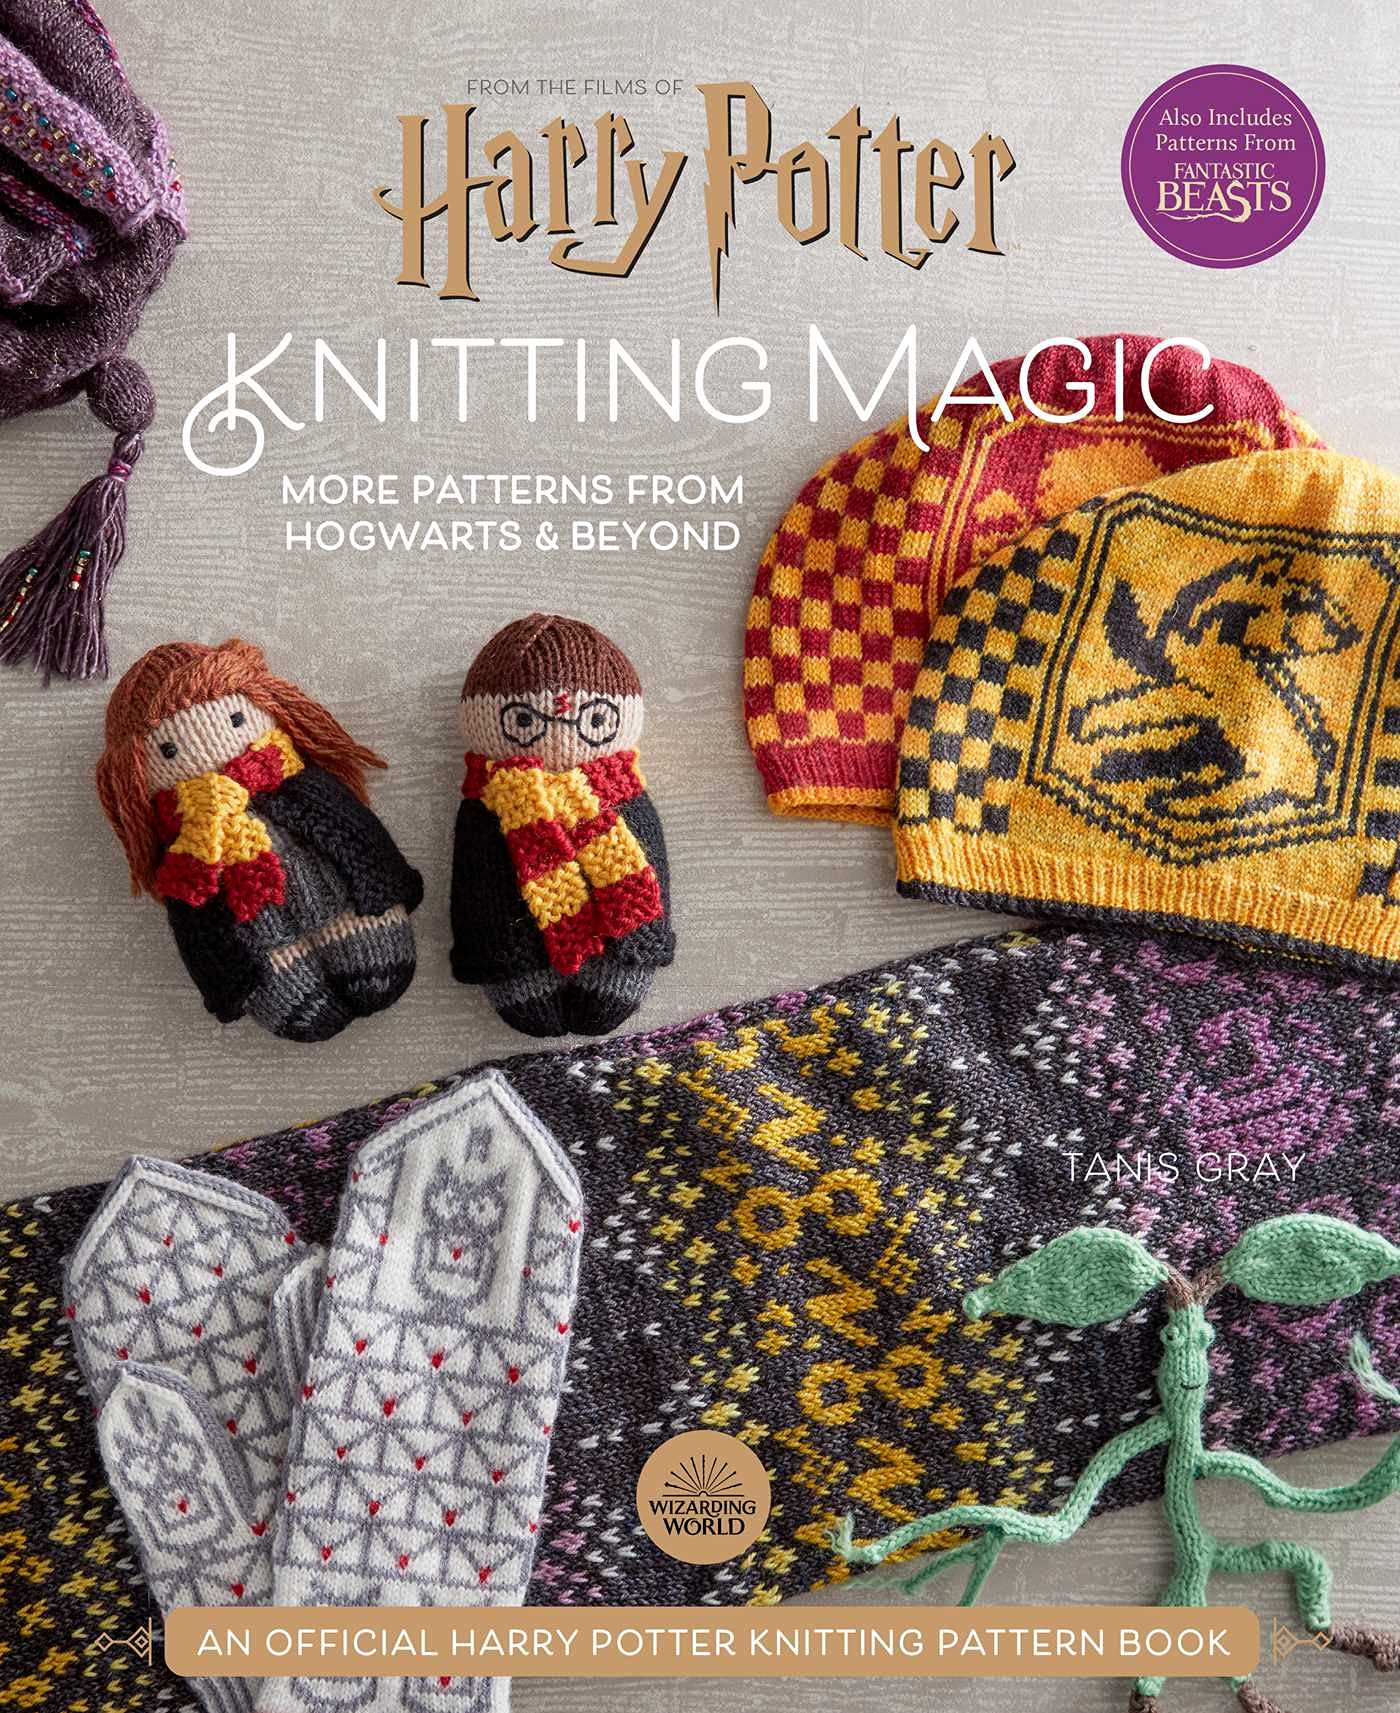 Image for "Harry Potter: Knitting Magic: More Patterns From Hogwarts and Beyond"